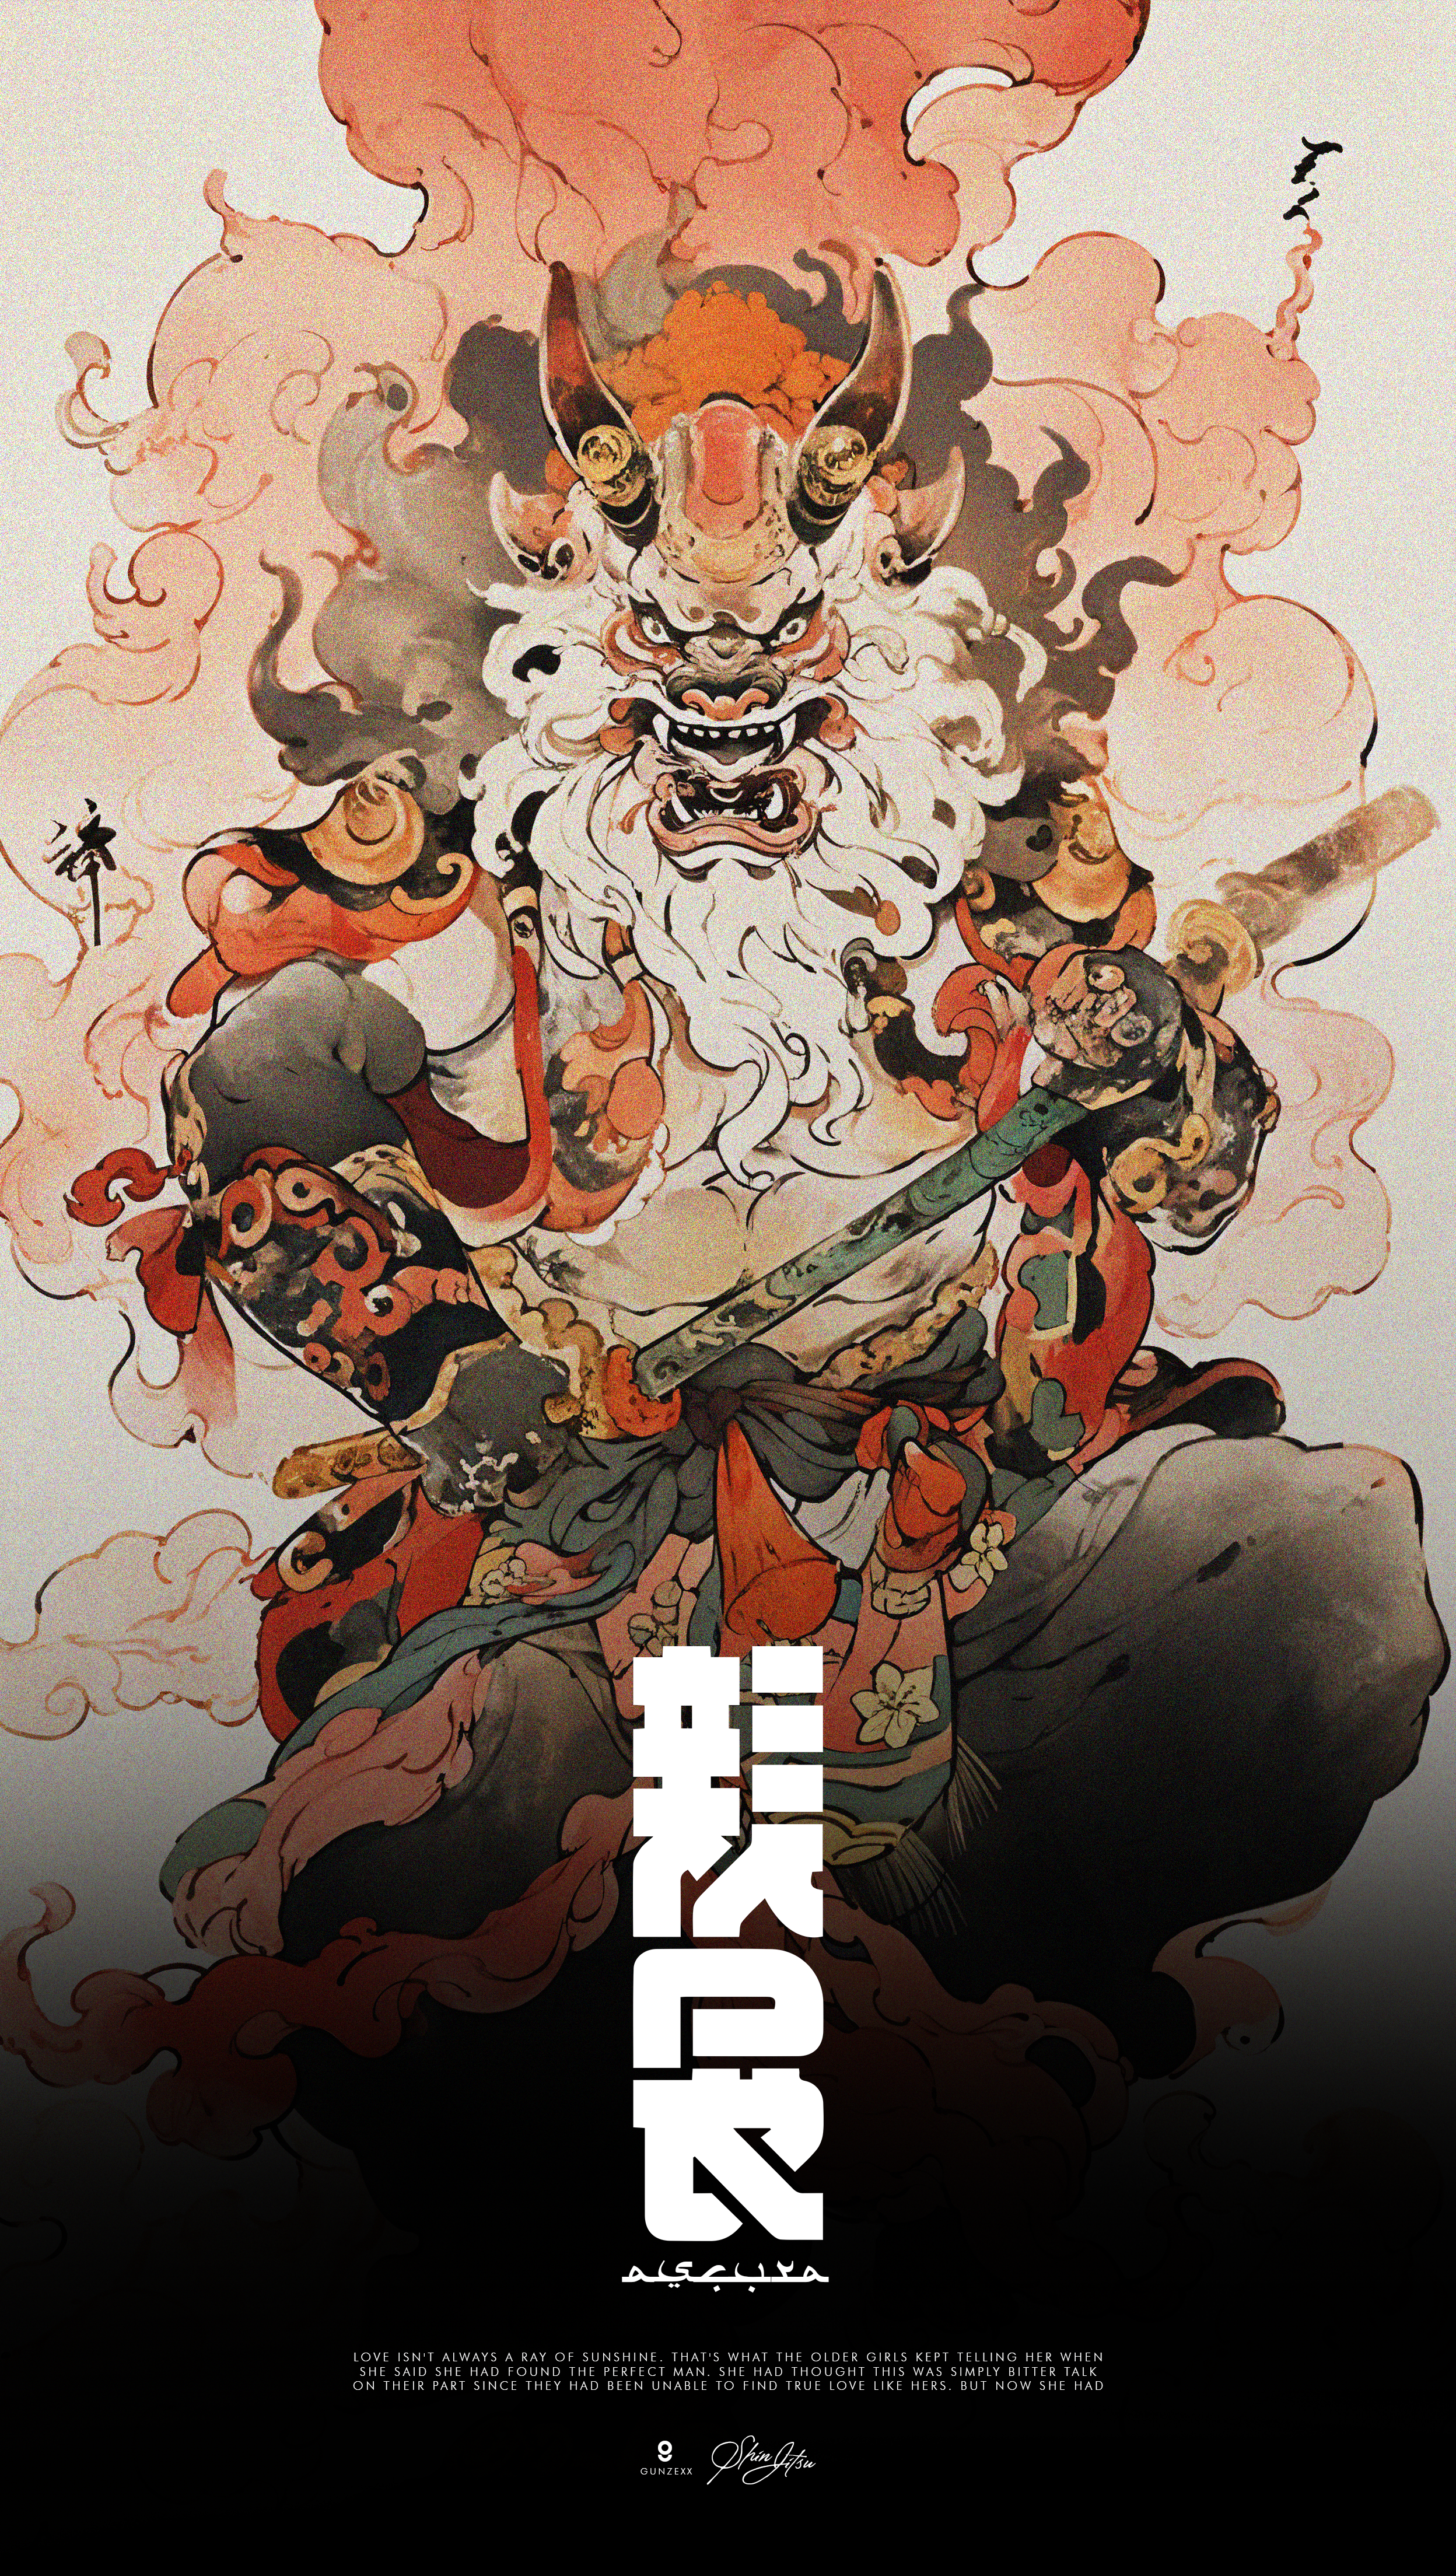 Angry Asian Warrior with Beard and Mustache Holding Sword